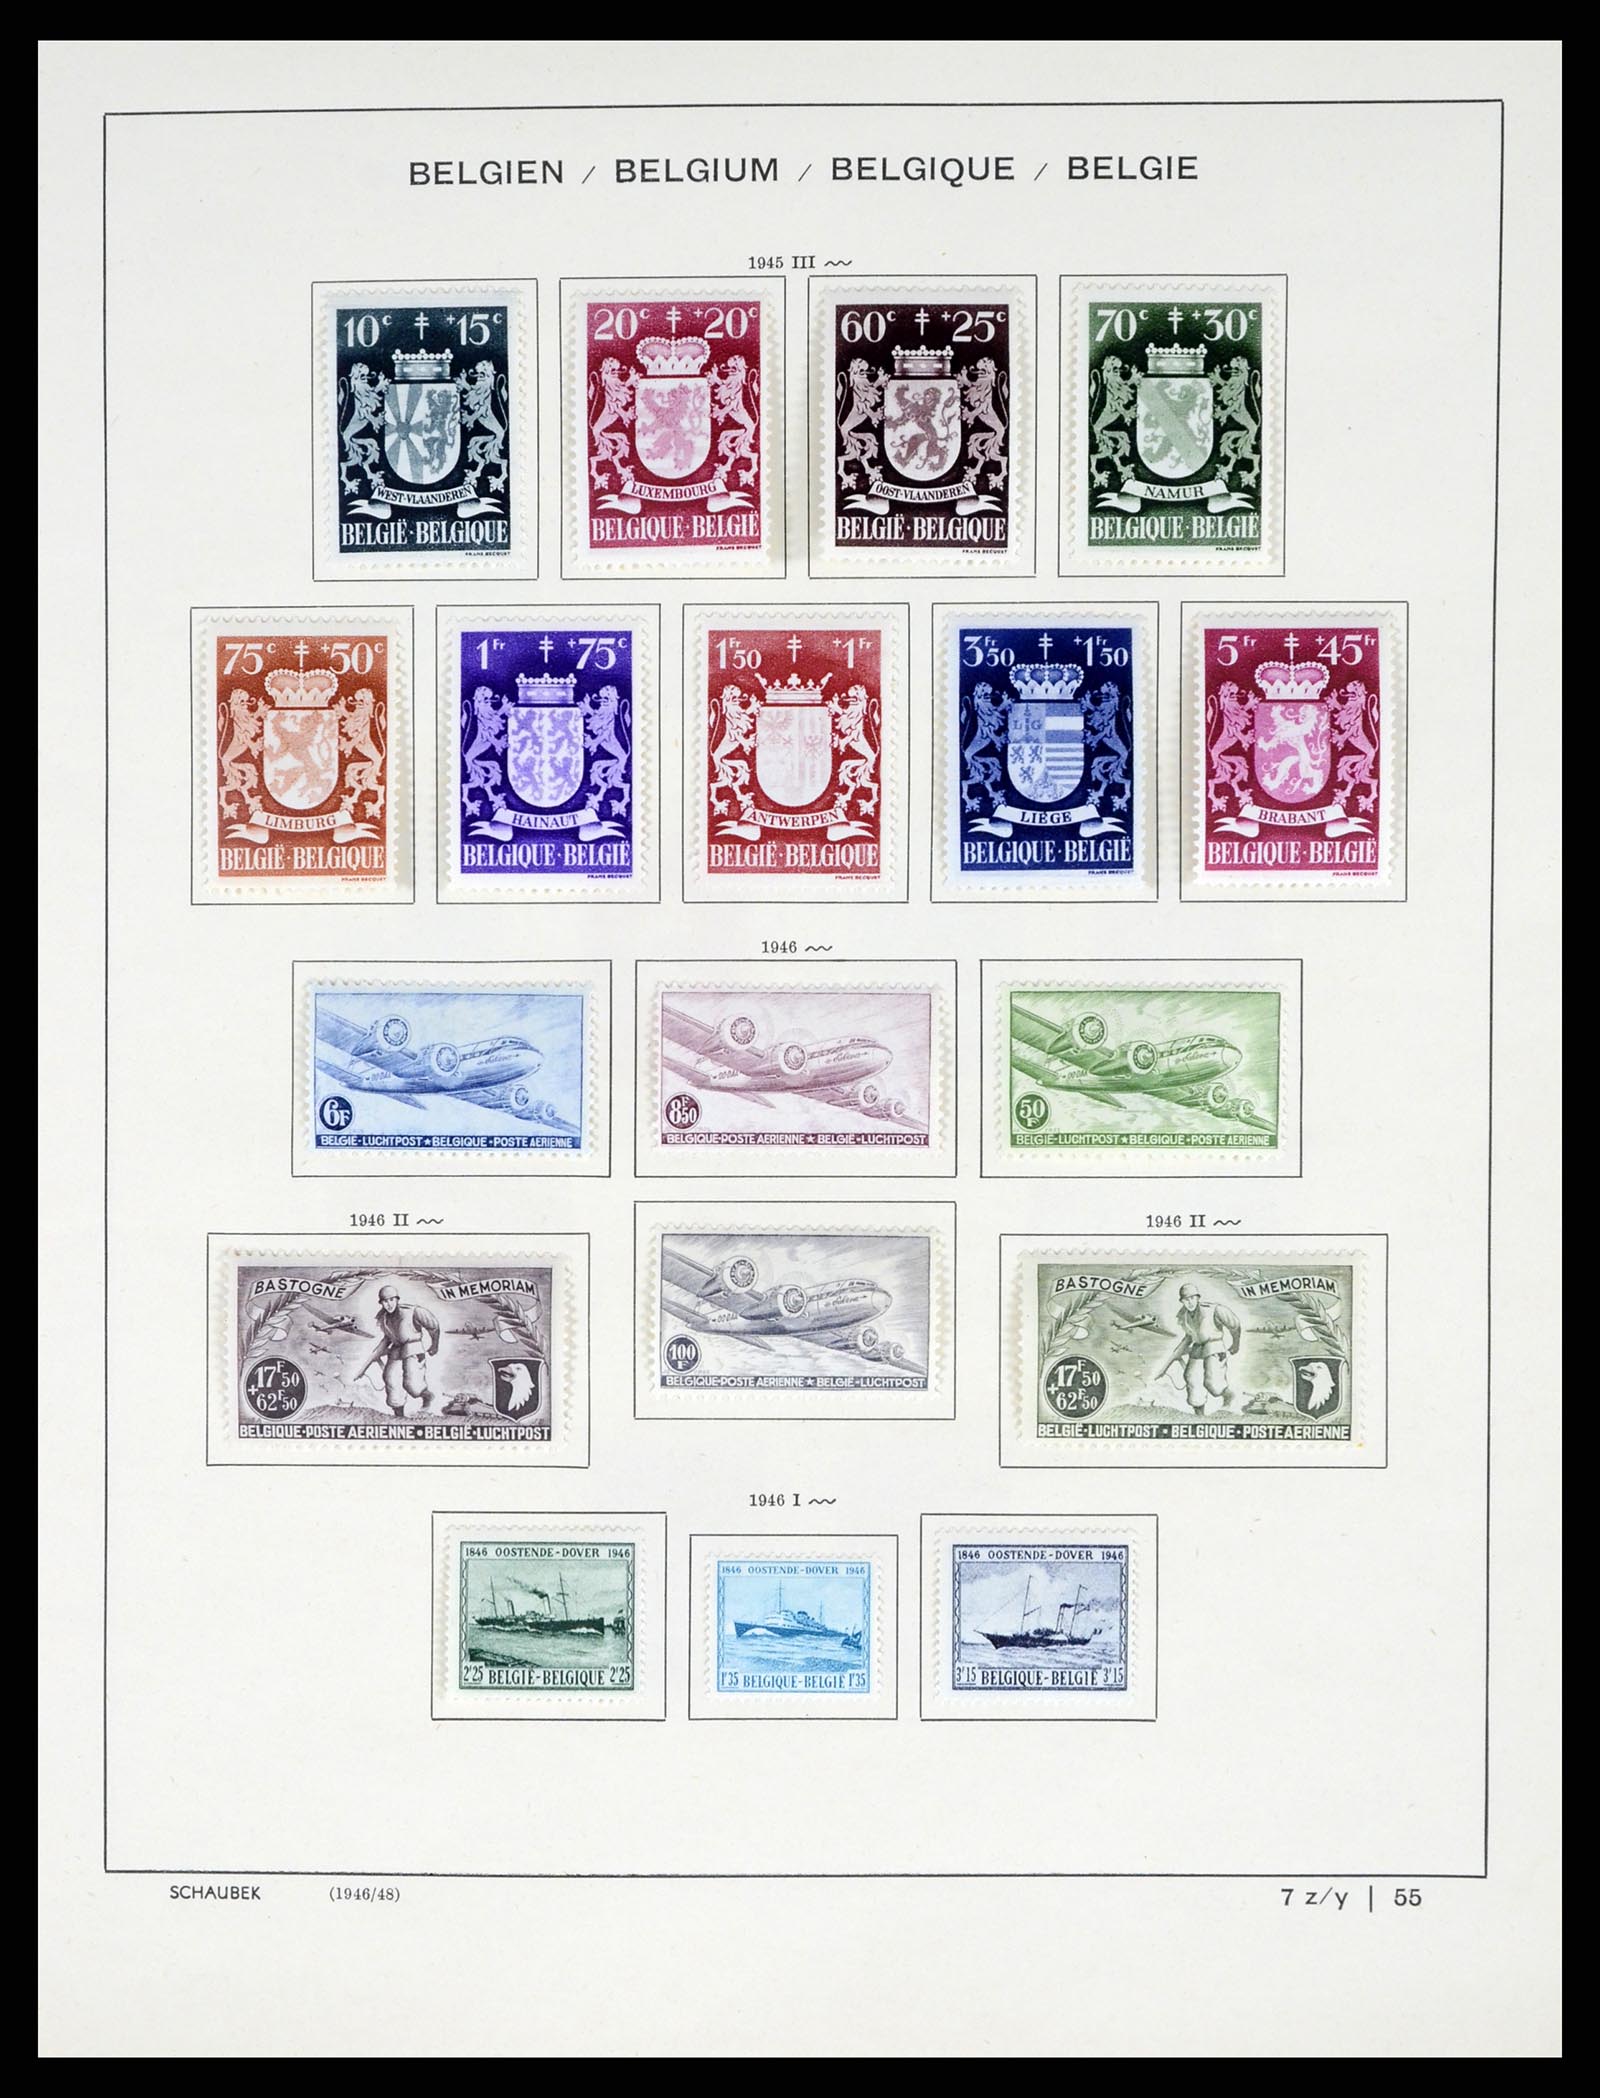 37595 062 - Stamp collection 37595 Super collection Belgium 1849-2015!